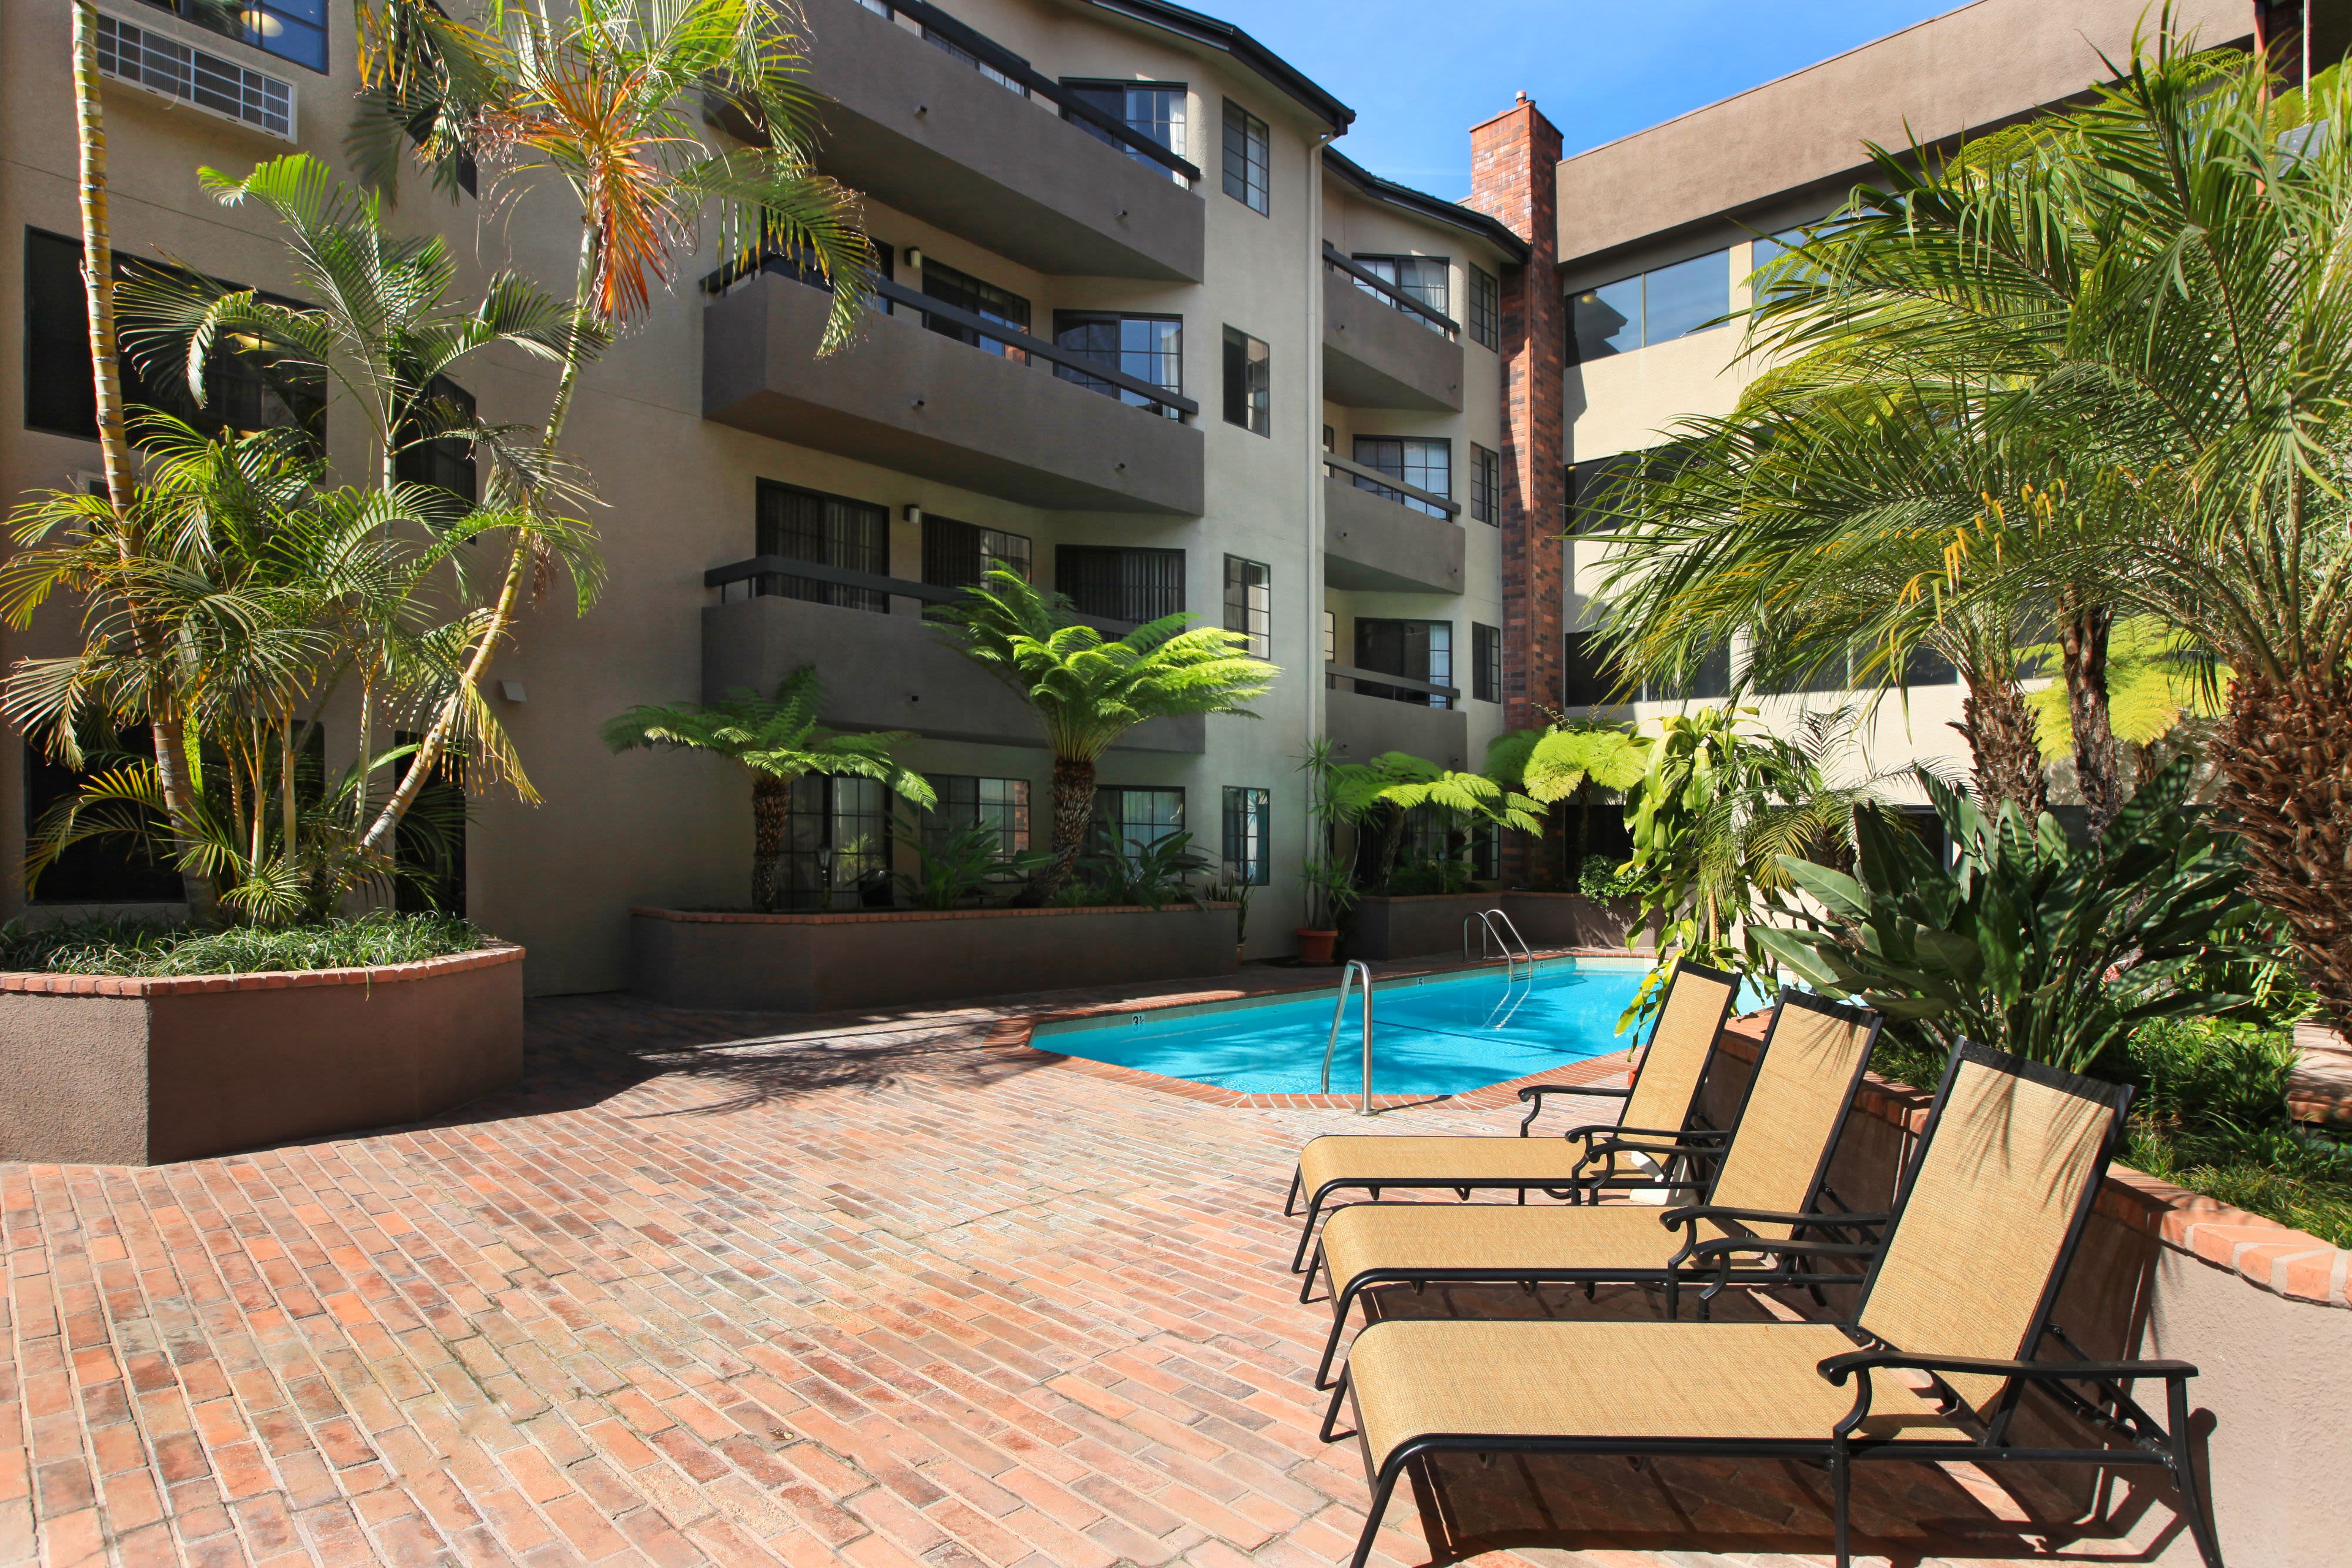 Lounge chairs by the pool at Savoy West Apartments in Los Angeles, California